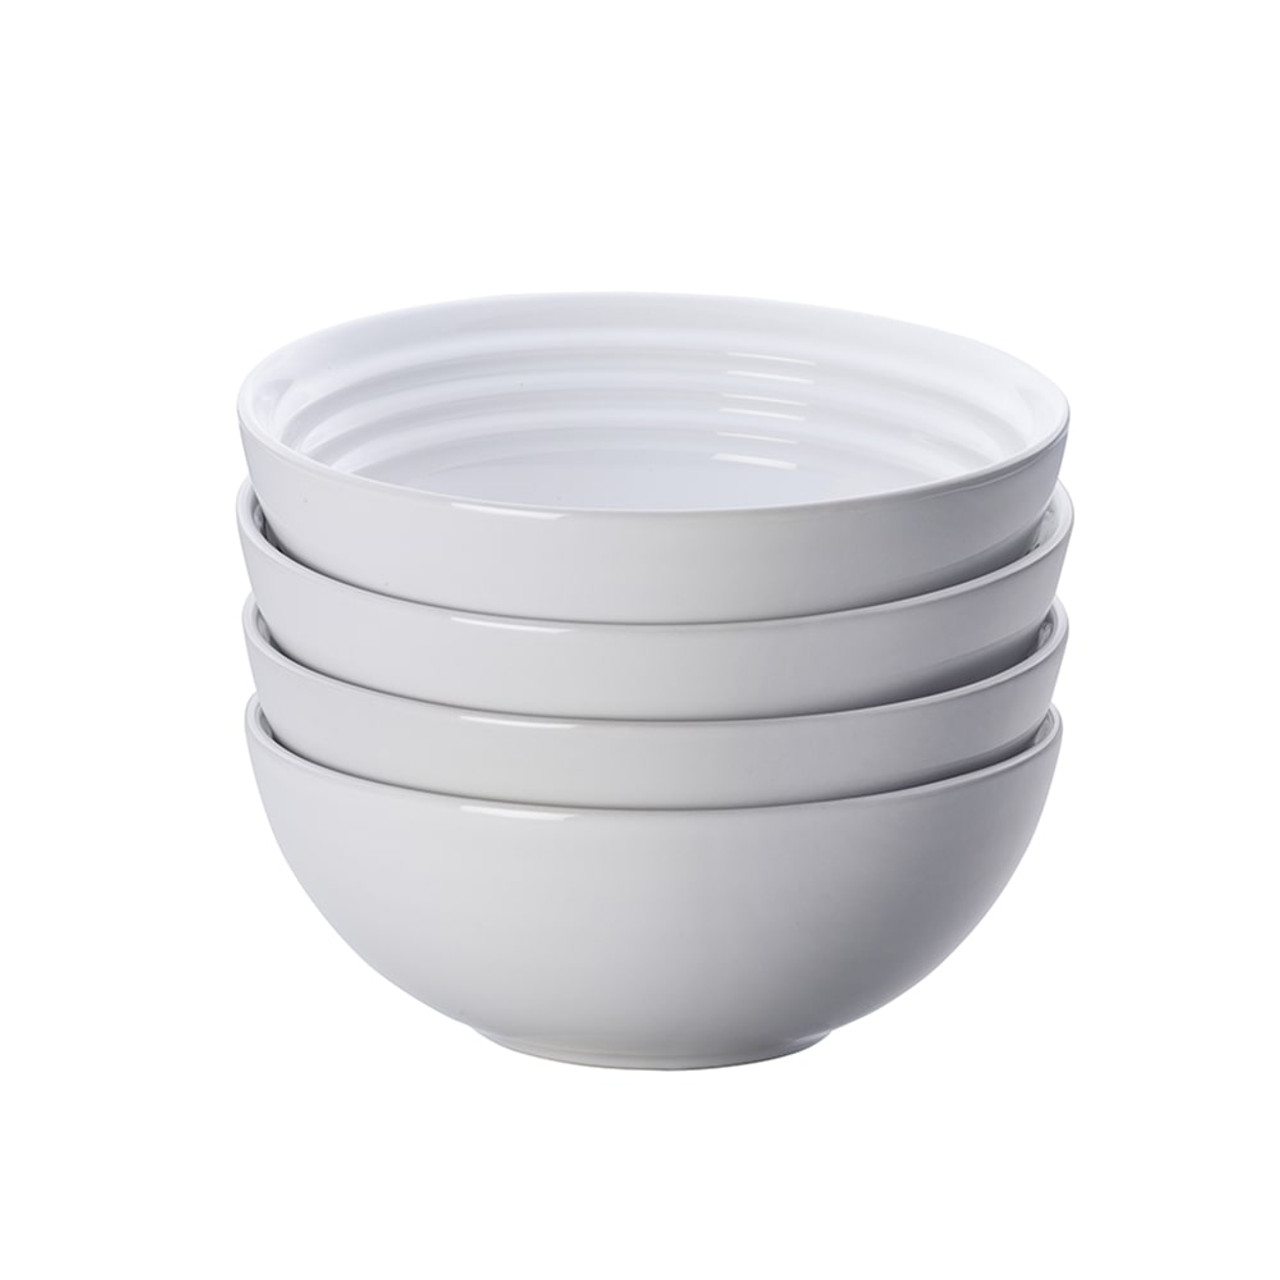 https://cdn11.bigcommerce.com/s-hccytny0od/images/stencil/1280x1280/products/2114/6842/le-creuset-soup-bowls-white__41731.1585428946.jpg?c=2?imbypass=on